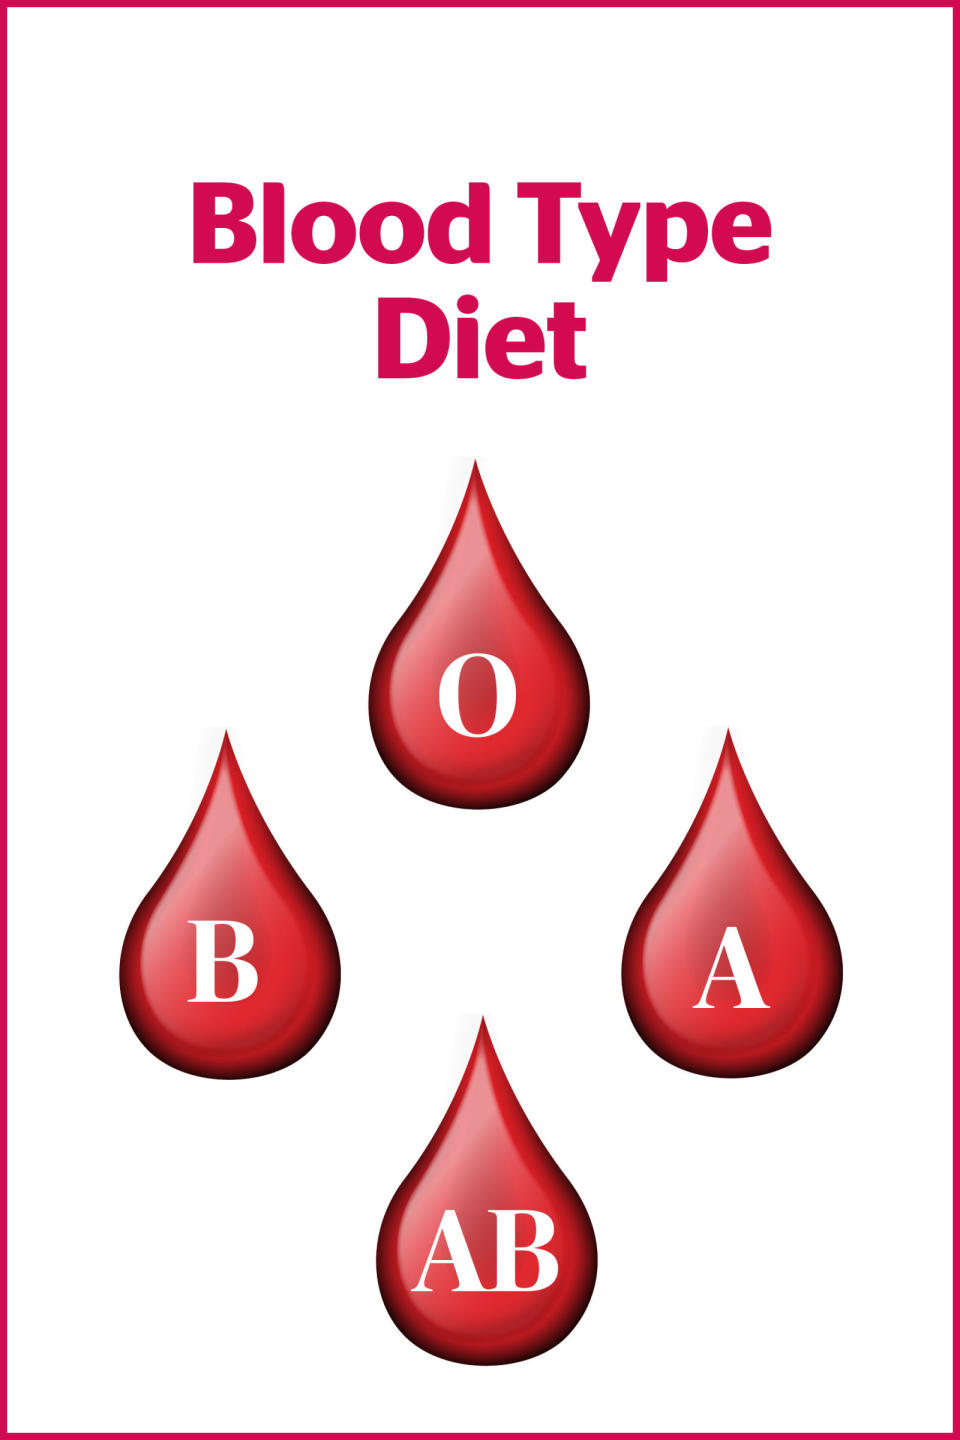 18) The Jury's Still Out on the Blood Type Diet